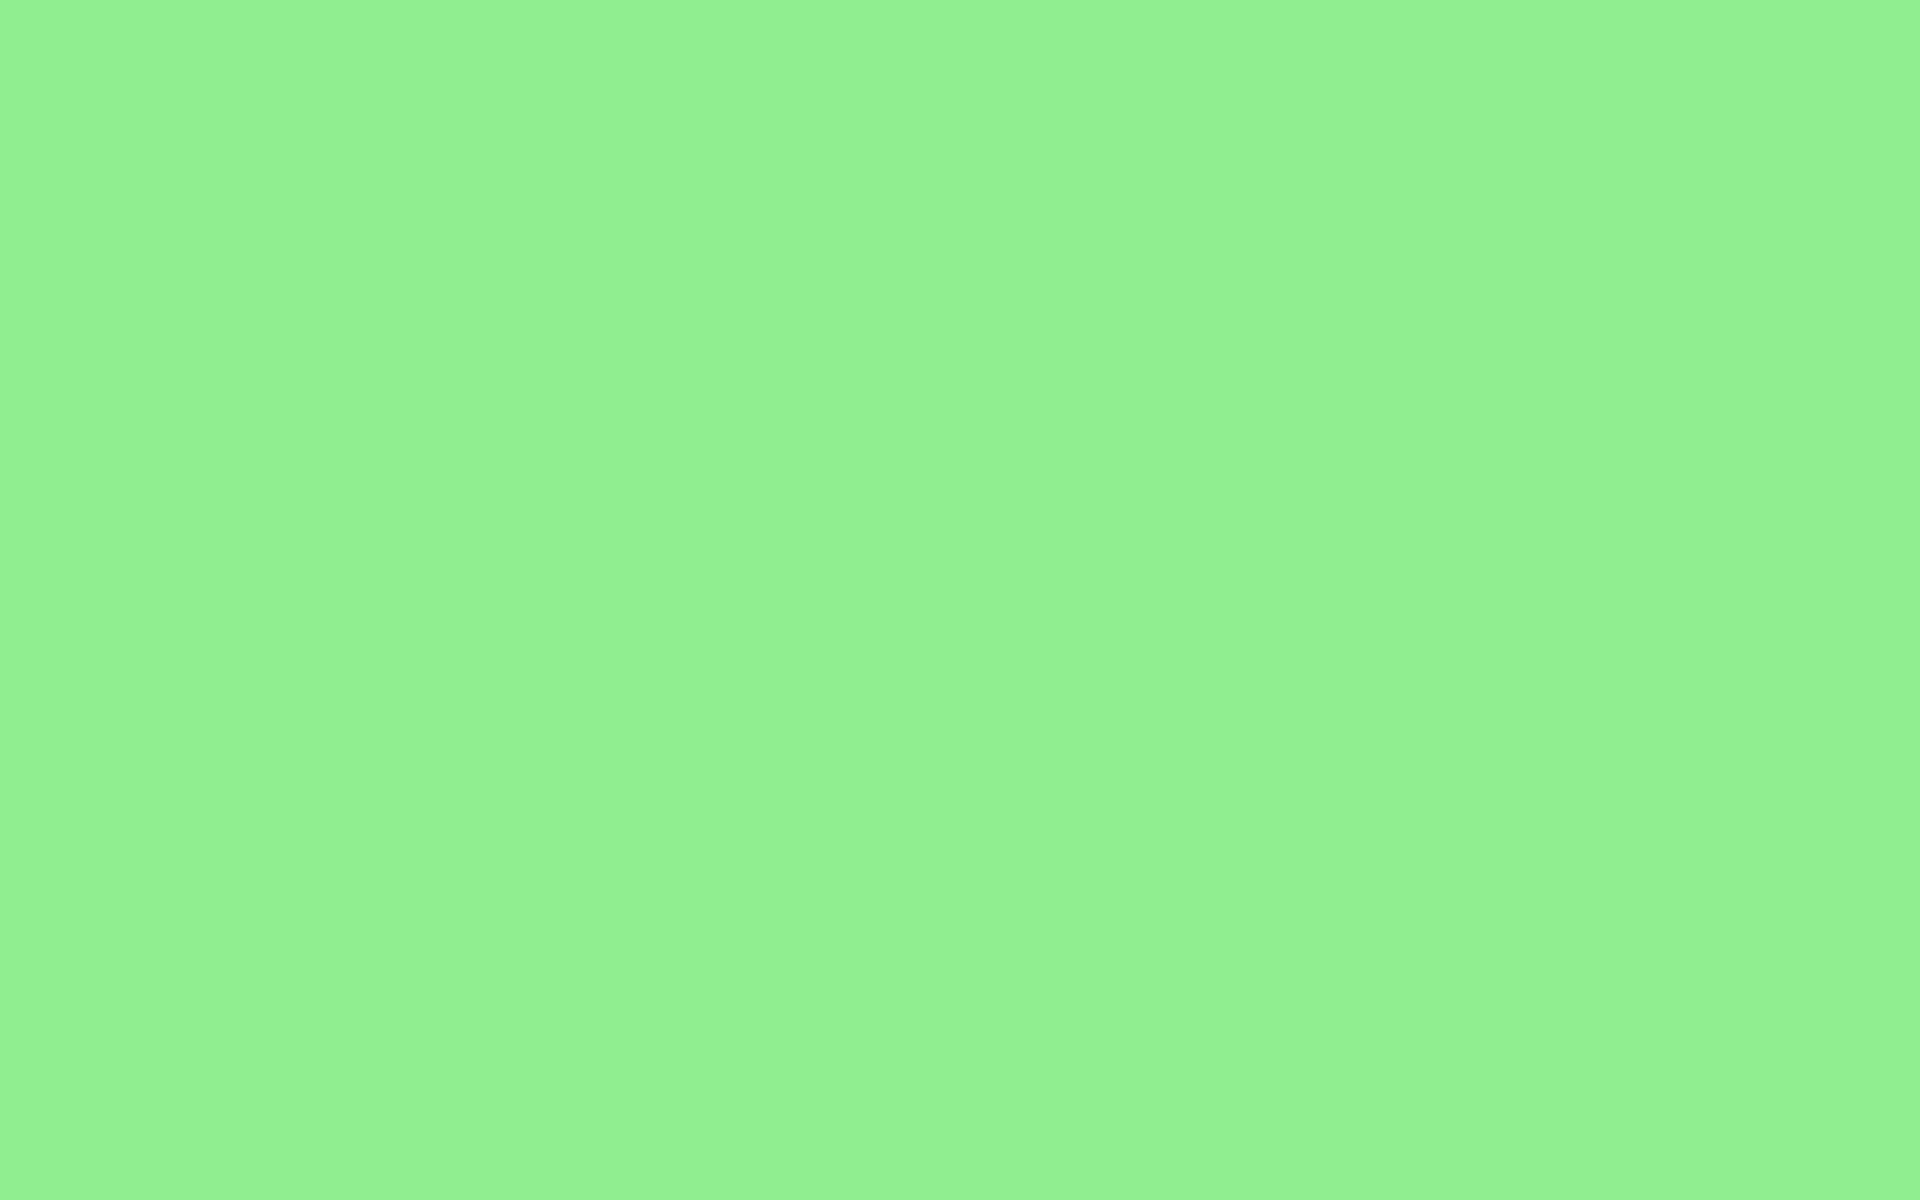 1920x1200-light-green-solid-color-background.jpg